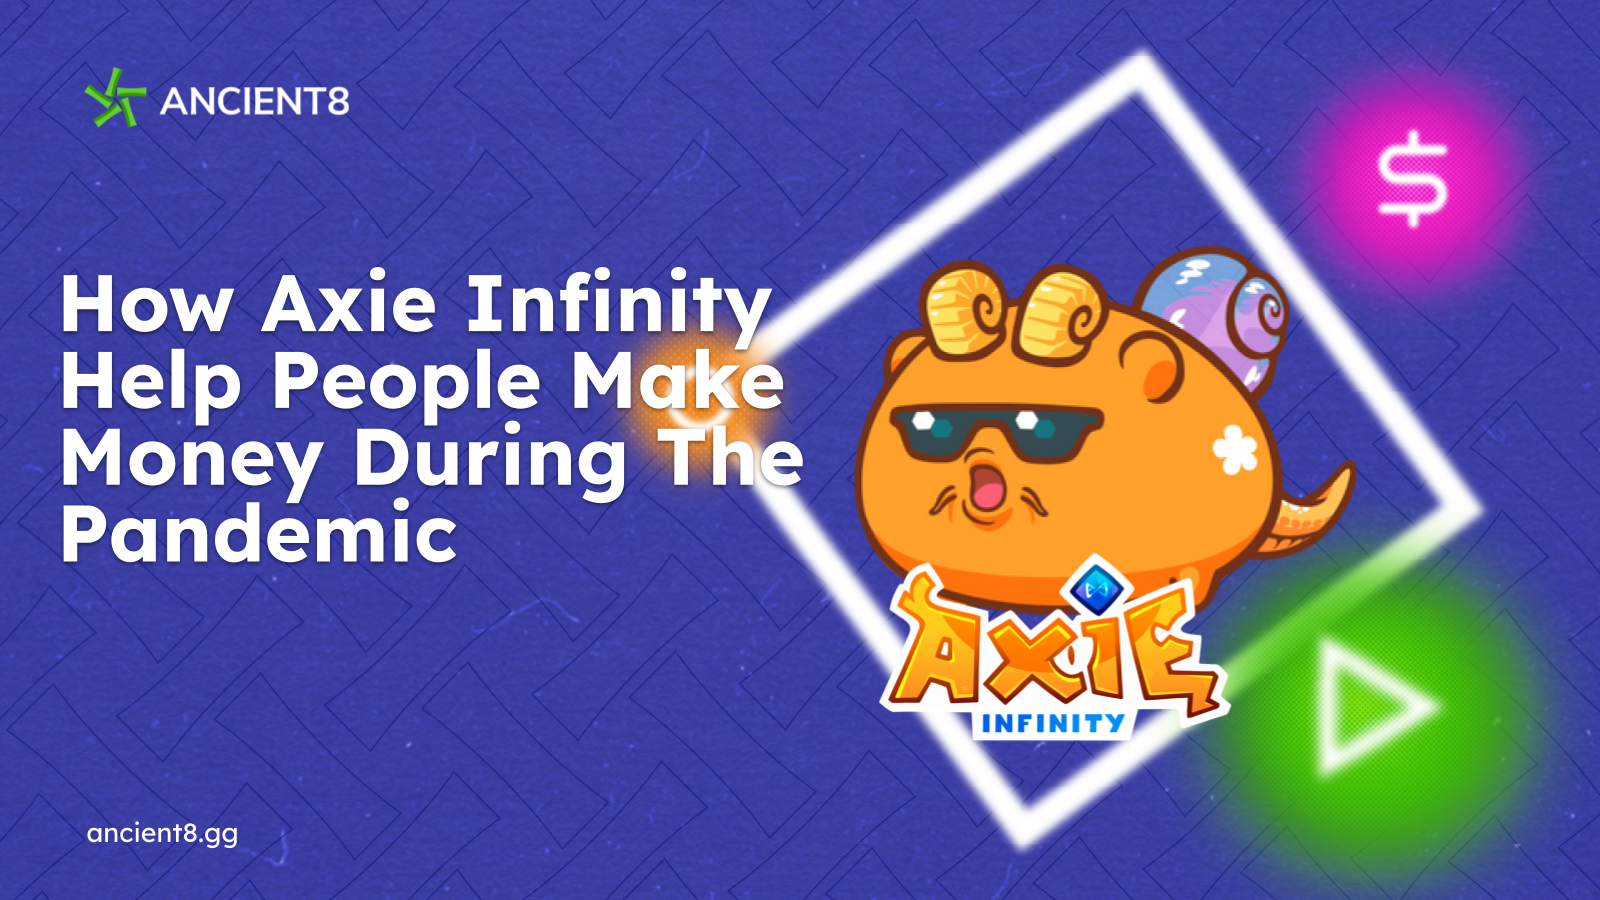 How Axie Infinity Help People Make Money During The Pandemic